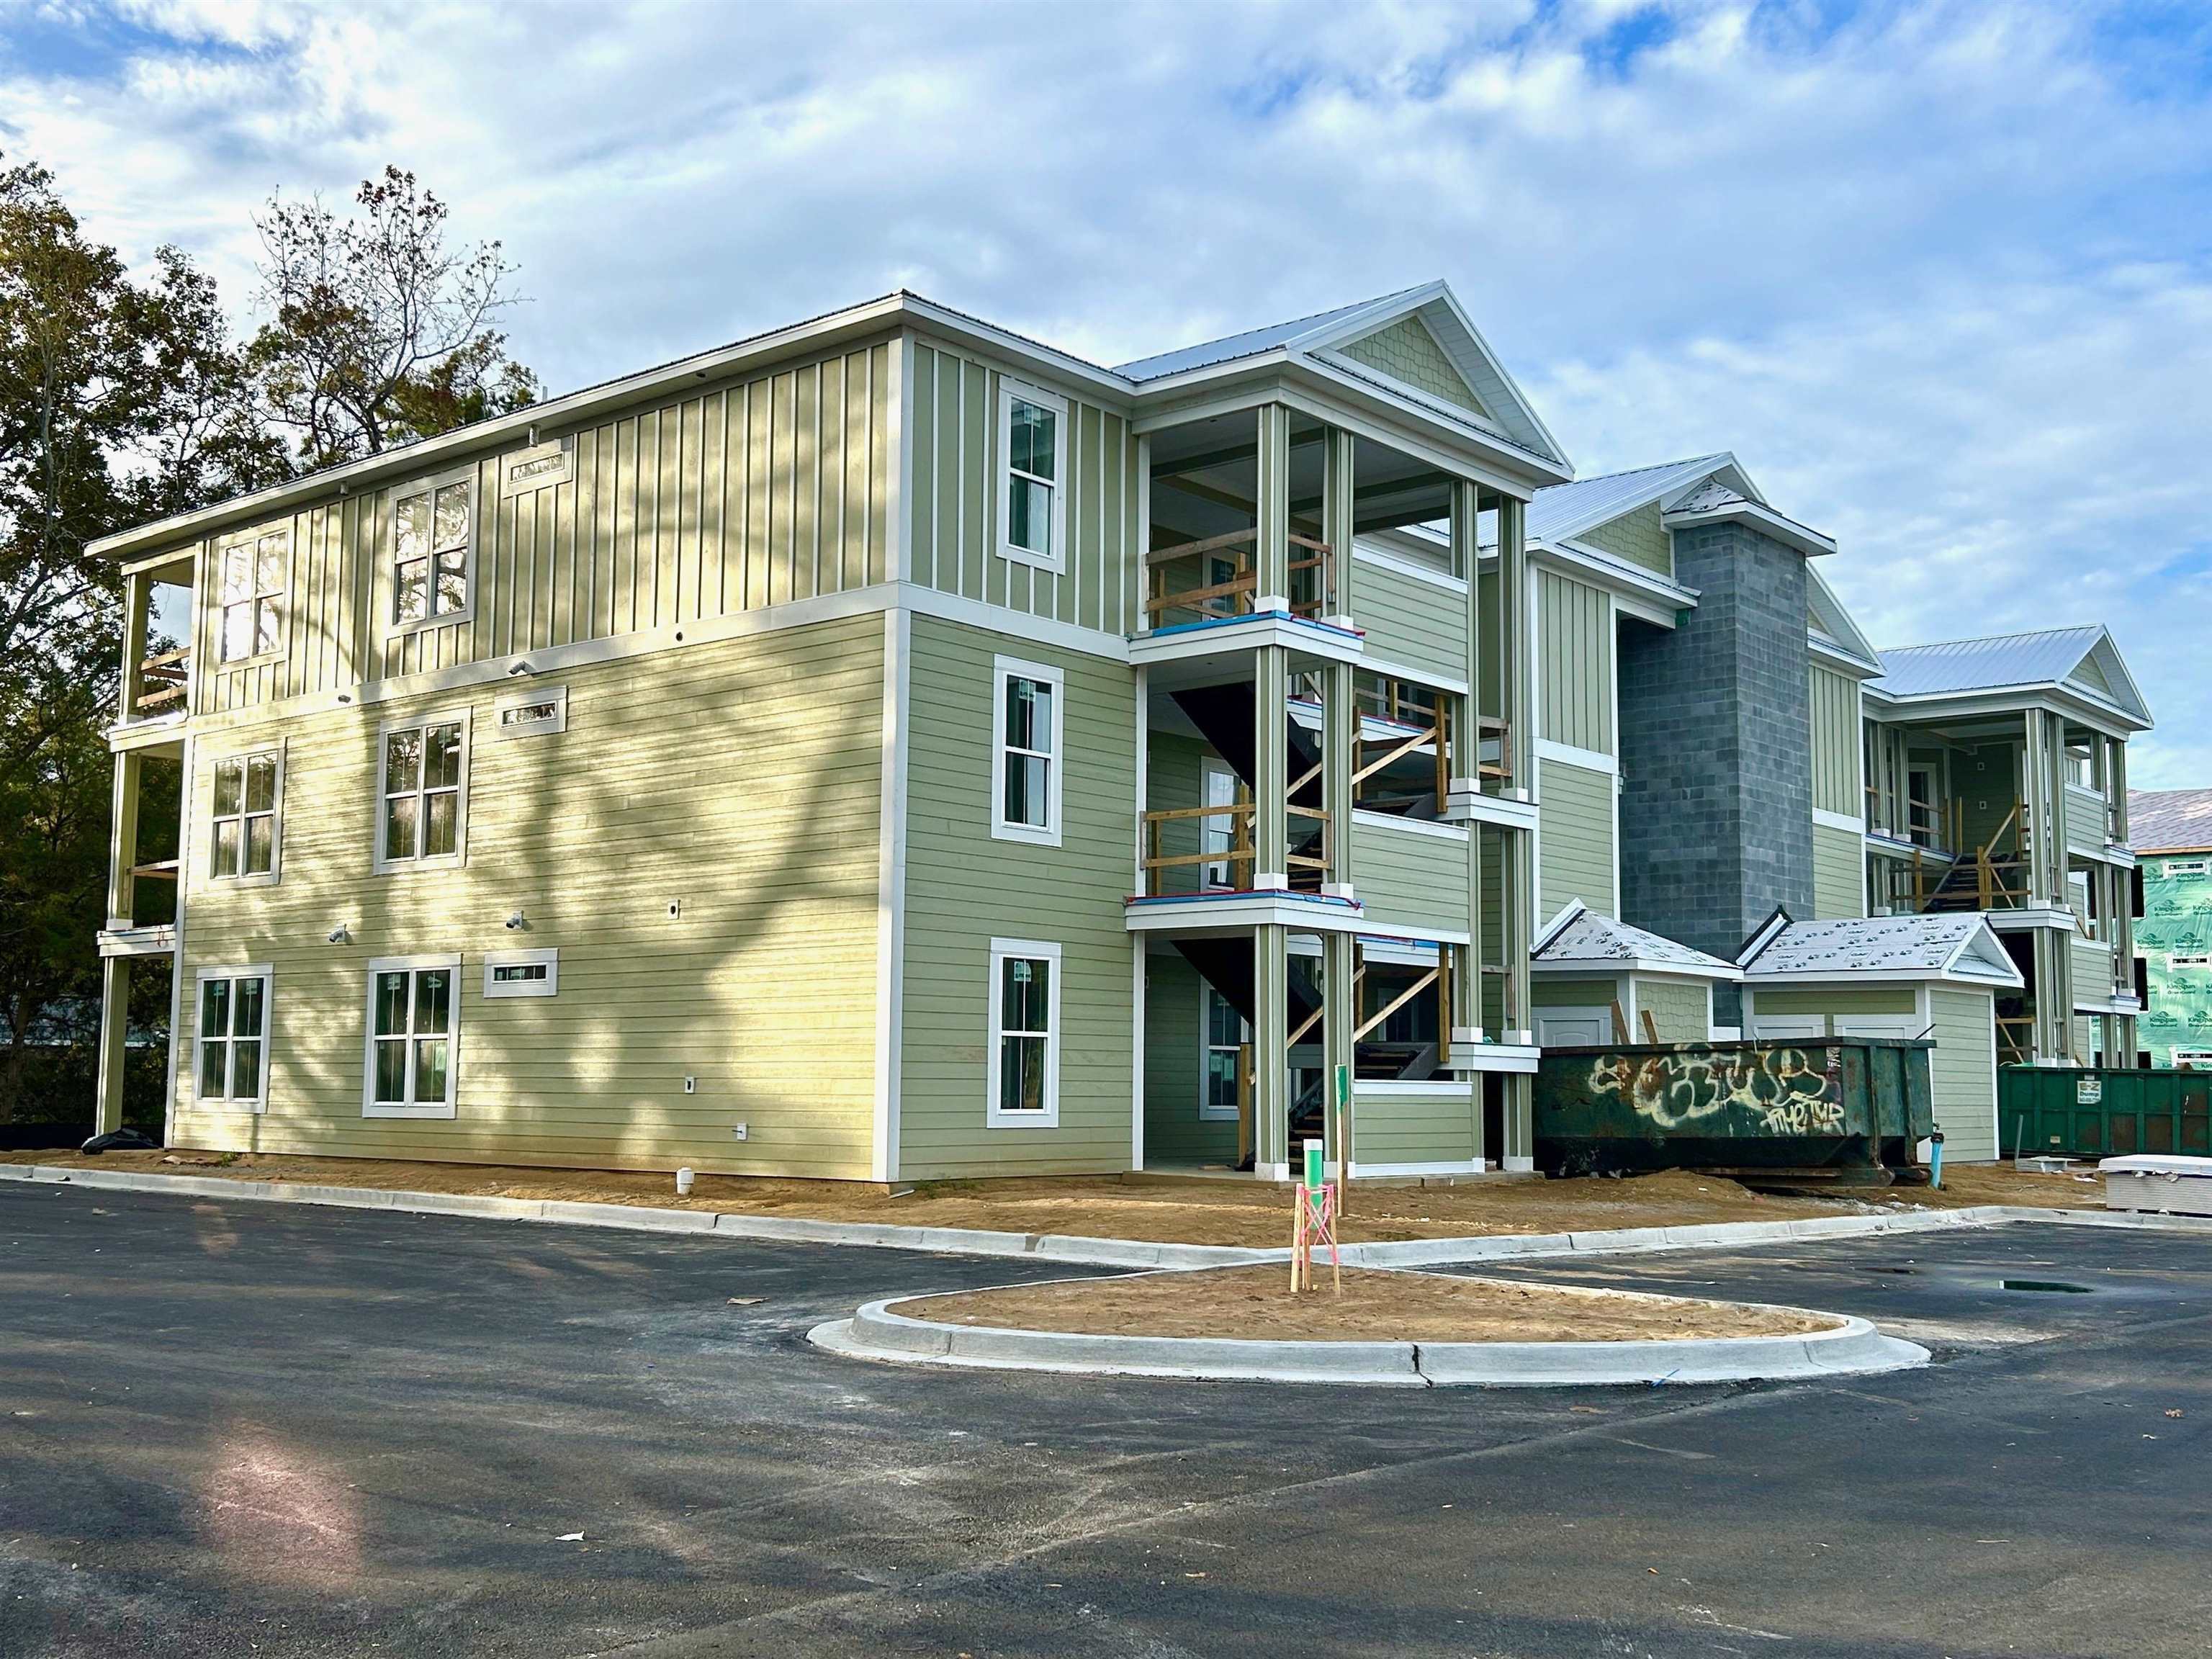 35 Sunny Side Ave. UNIT 2-A Murrells Inlet, SC 29576